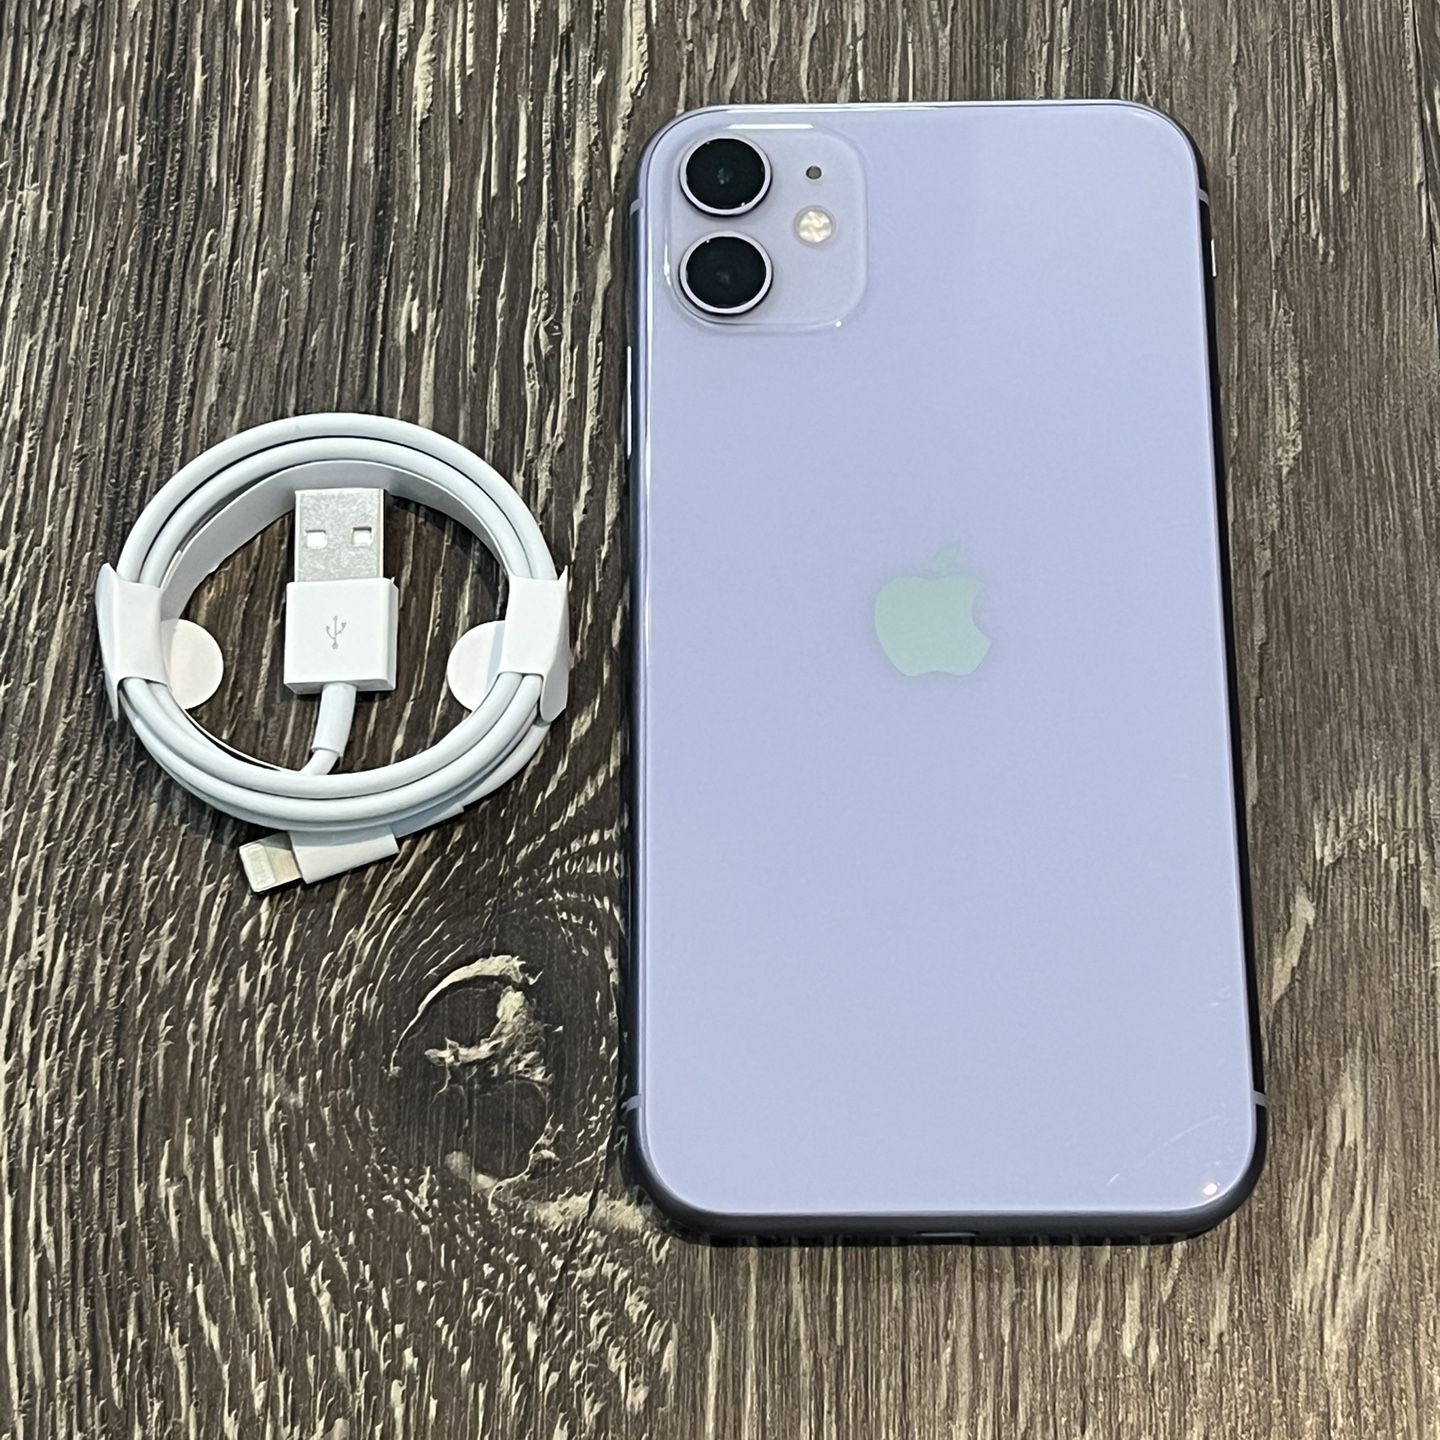 iPhone 11 Purple UNLOCKED FOR ANY CARRIER!